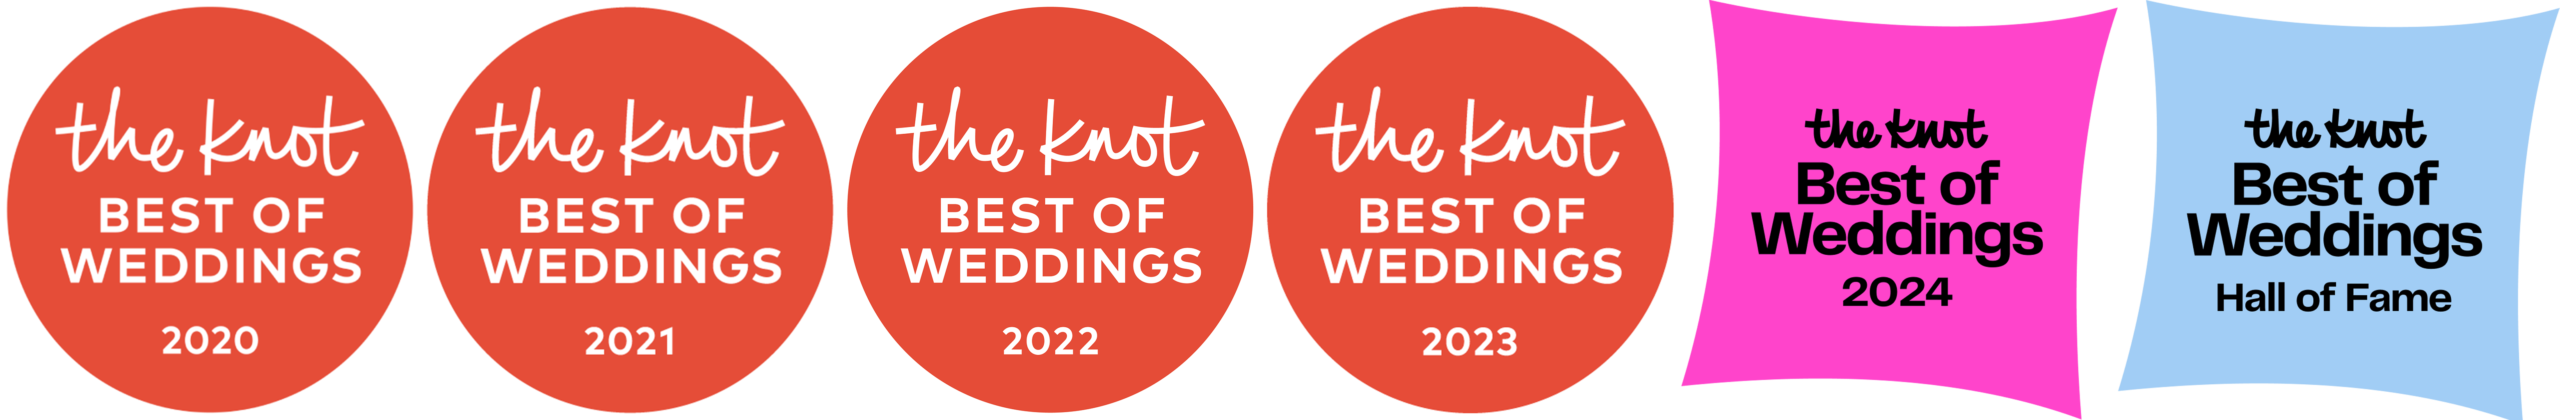 AZ Wedding Photographer - Awarded The Knot Best of Weddings 2020-2024 and Hall of Fame 2024.